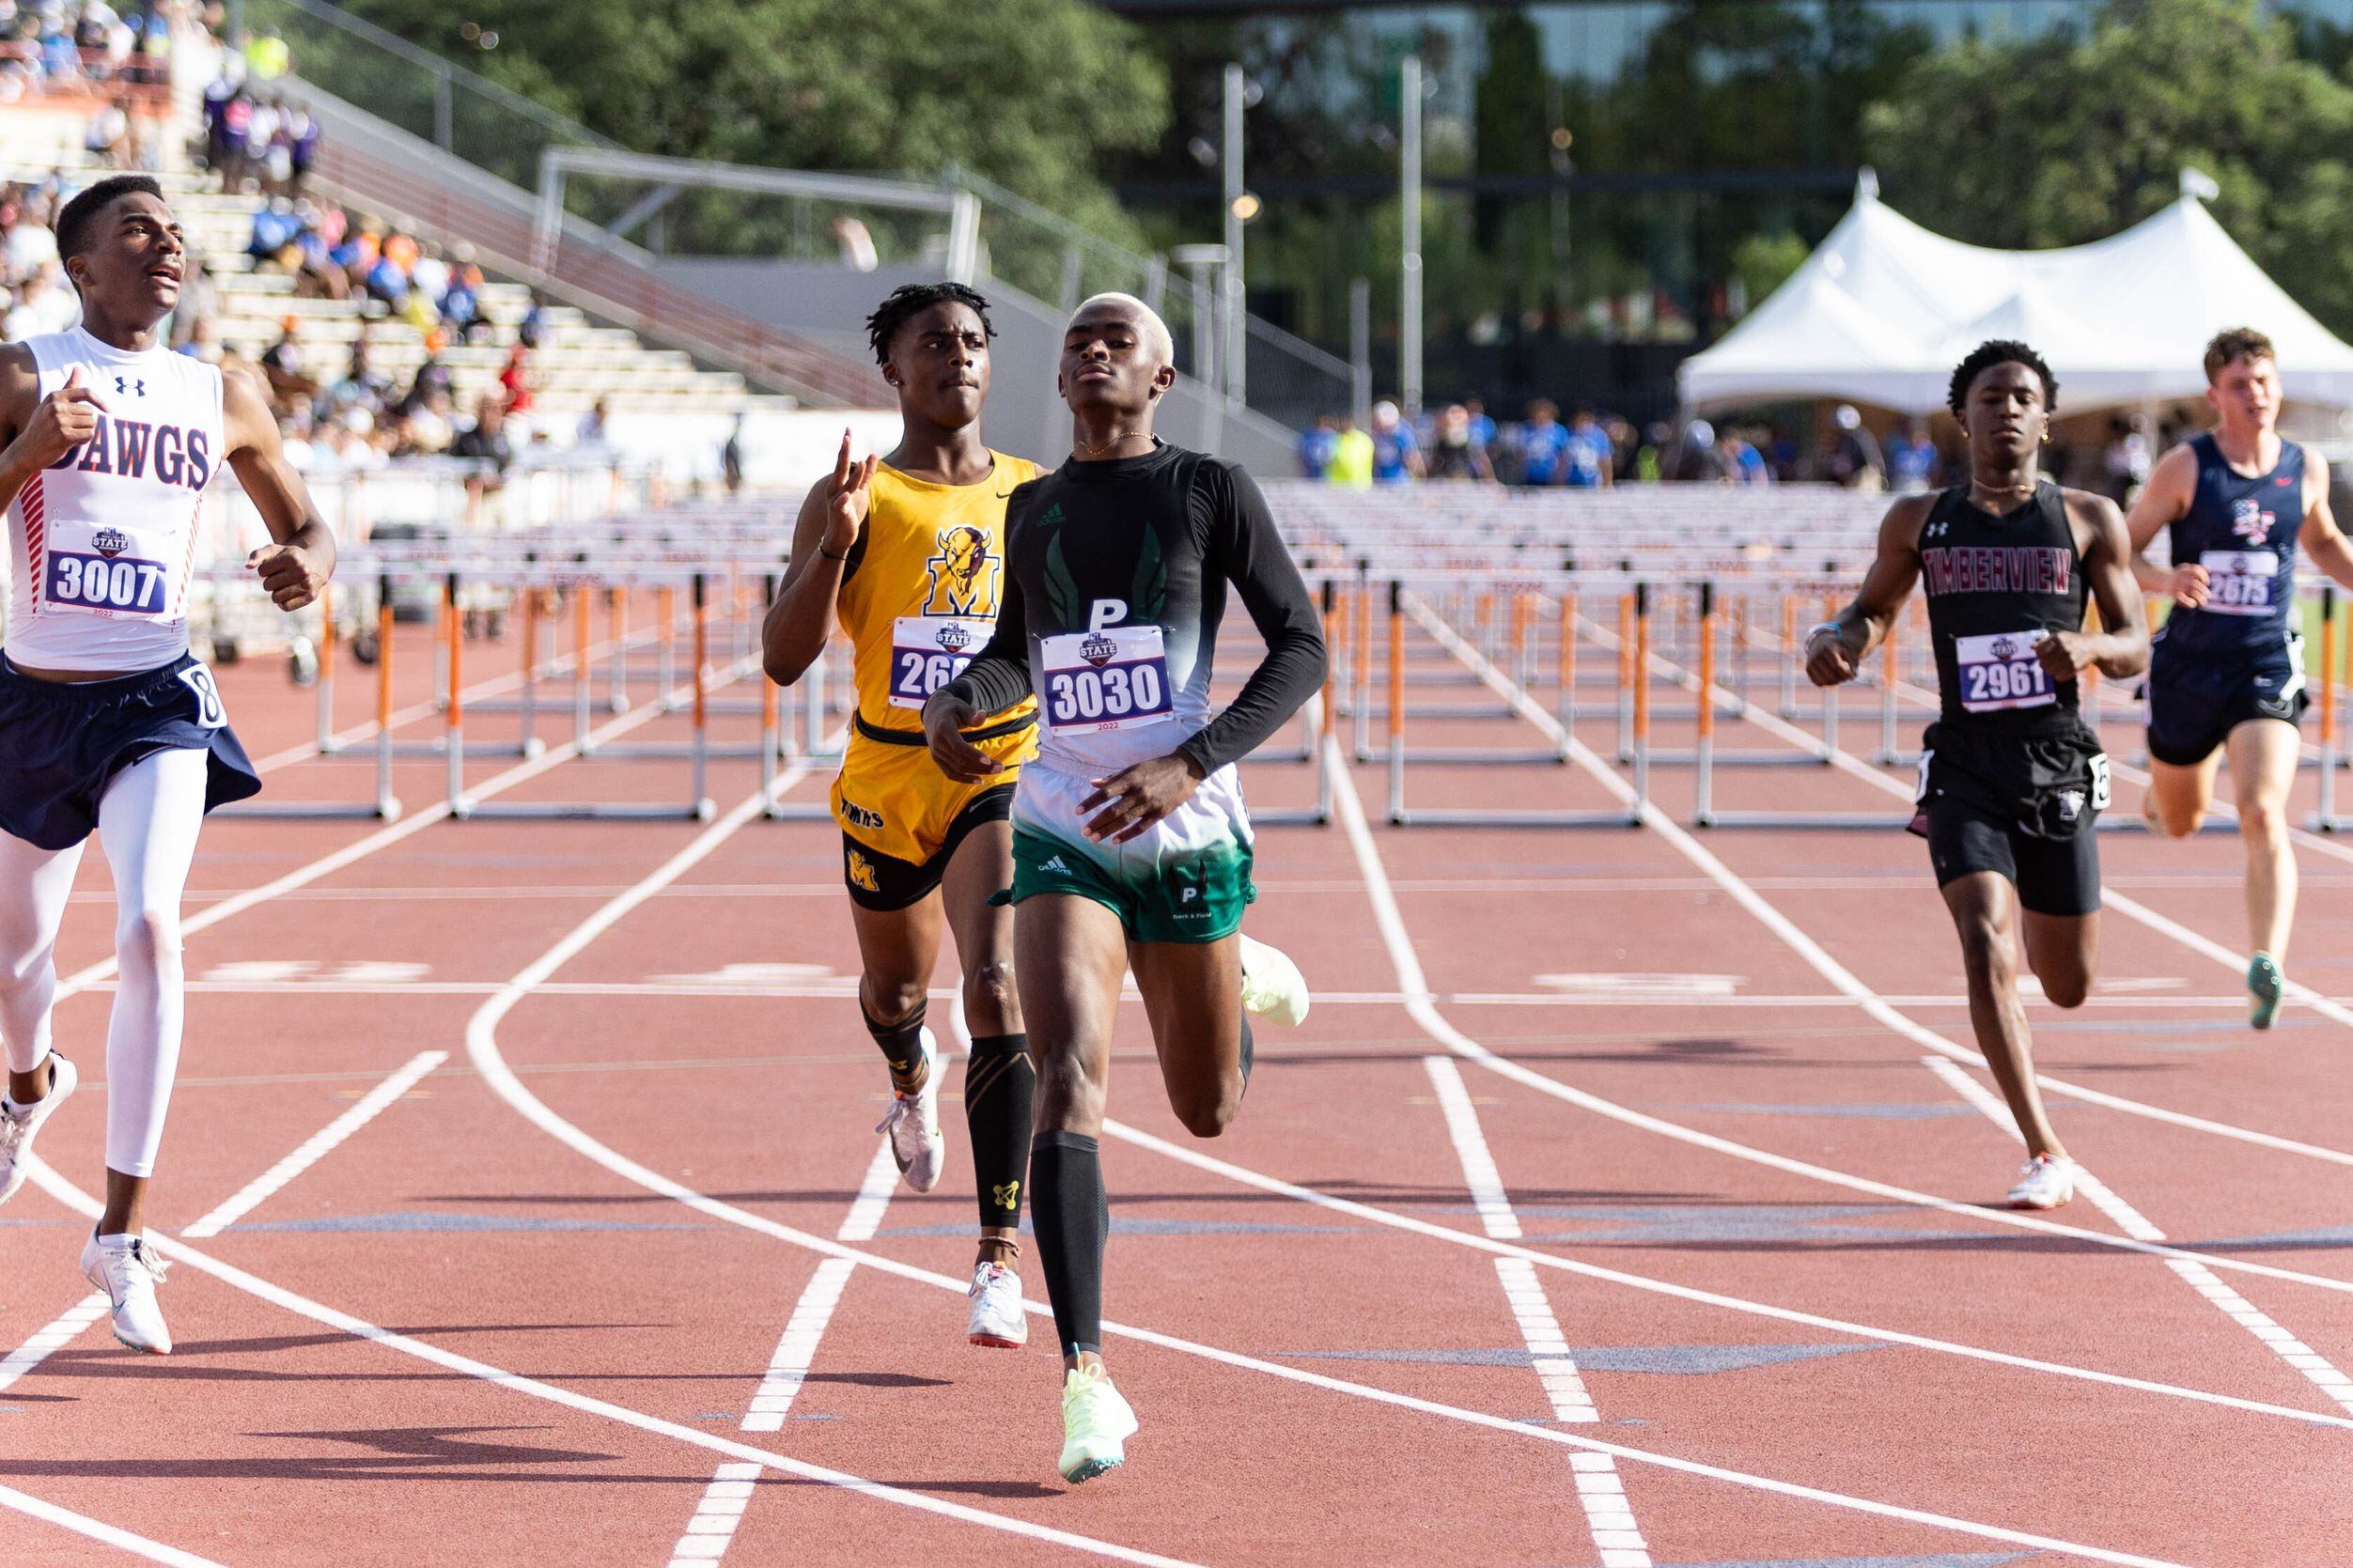 Kendrick Smallwood of Mesquite Poteet reacts after winning the boys’ 110m hurdles at the UIL...